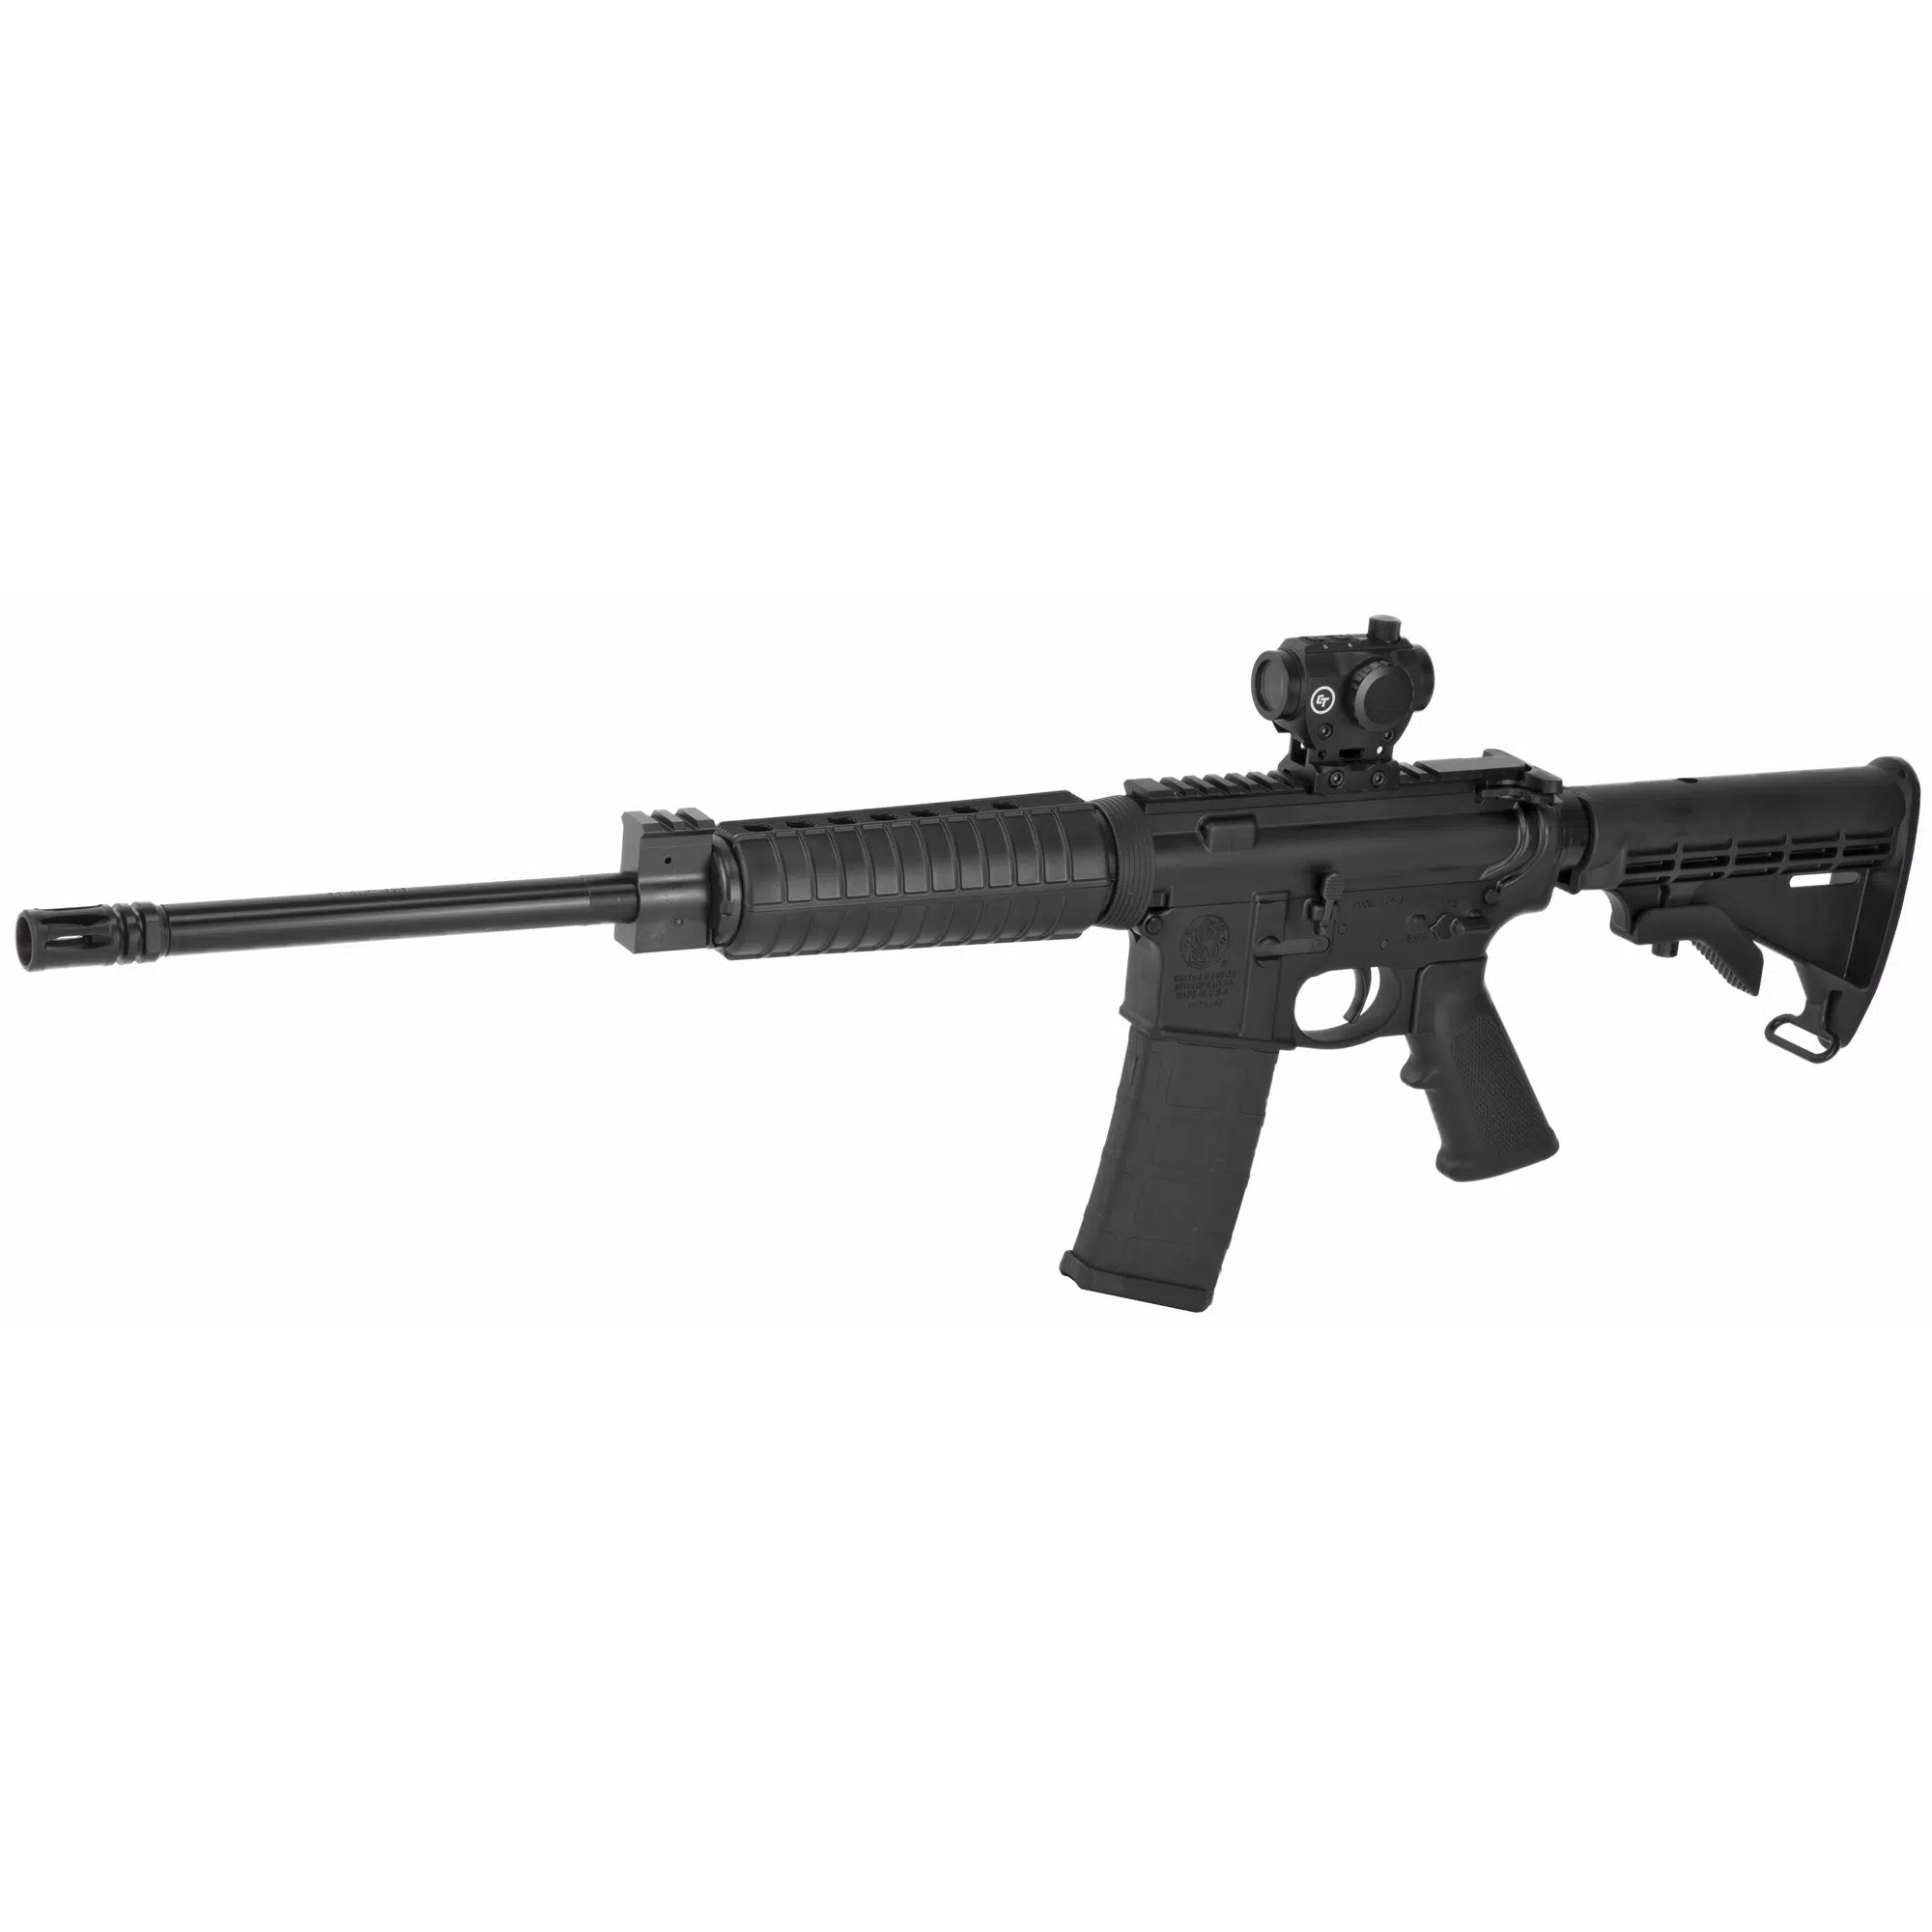 Smith & Wesson M&P15 Sport II AR-15 Rifle with CTS-103 Red/Green Dot 